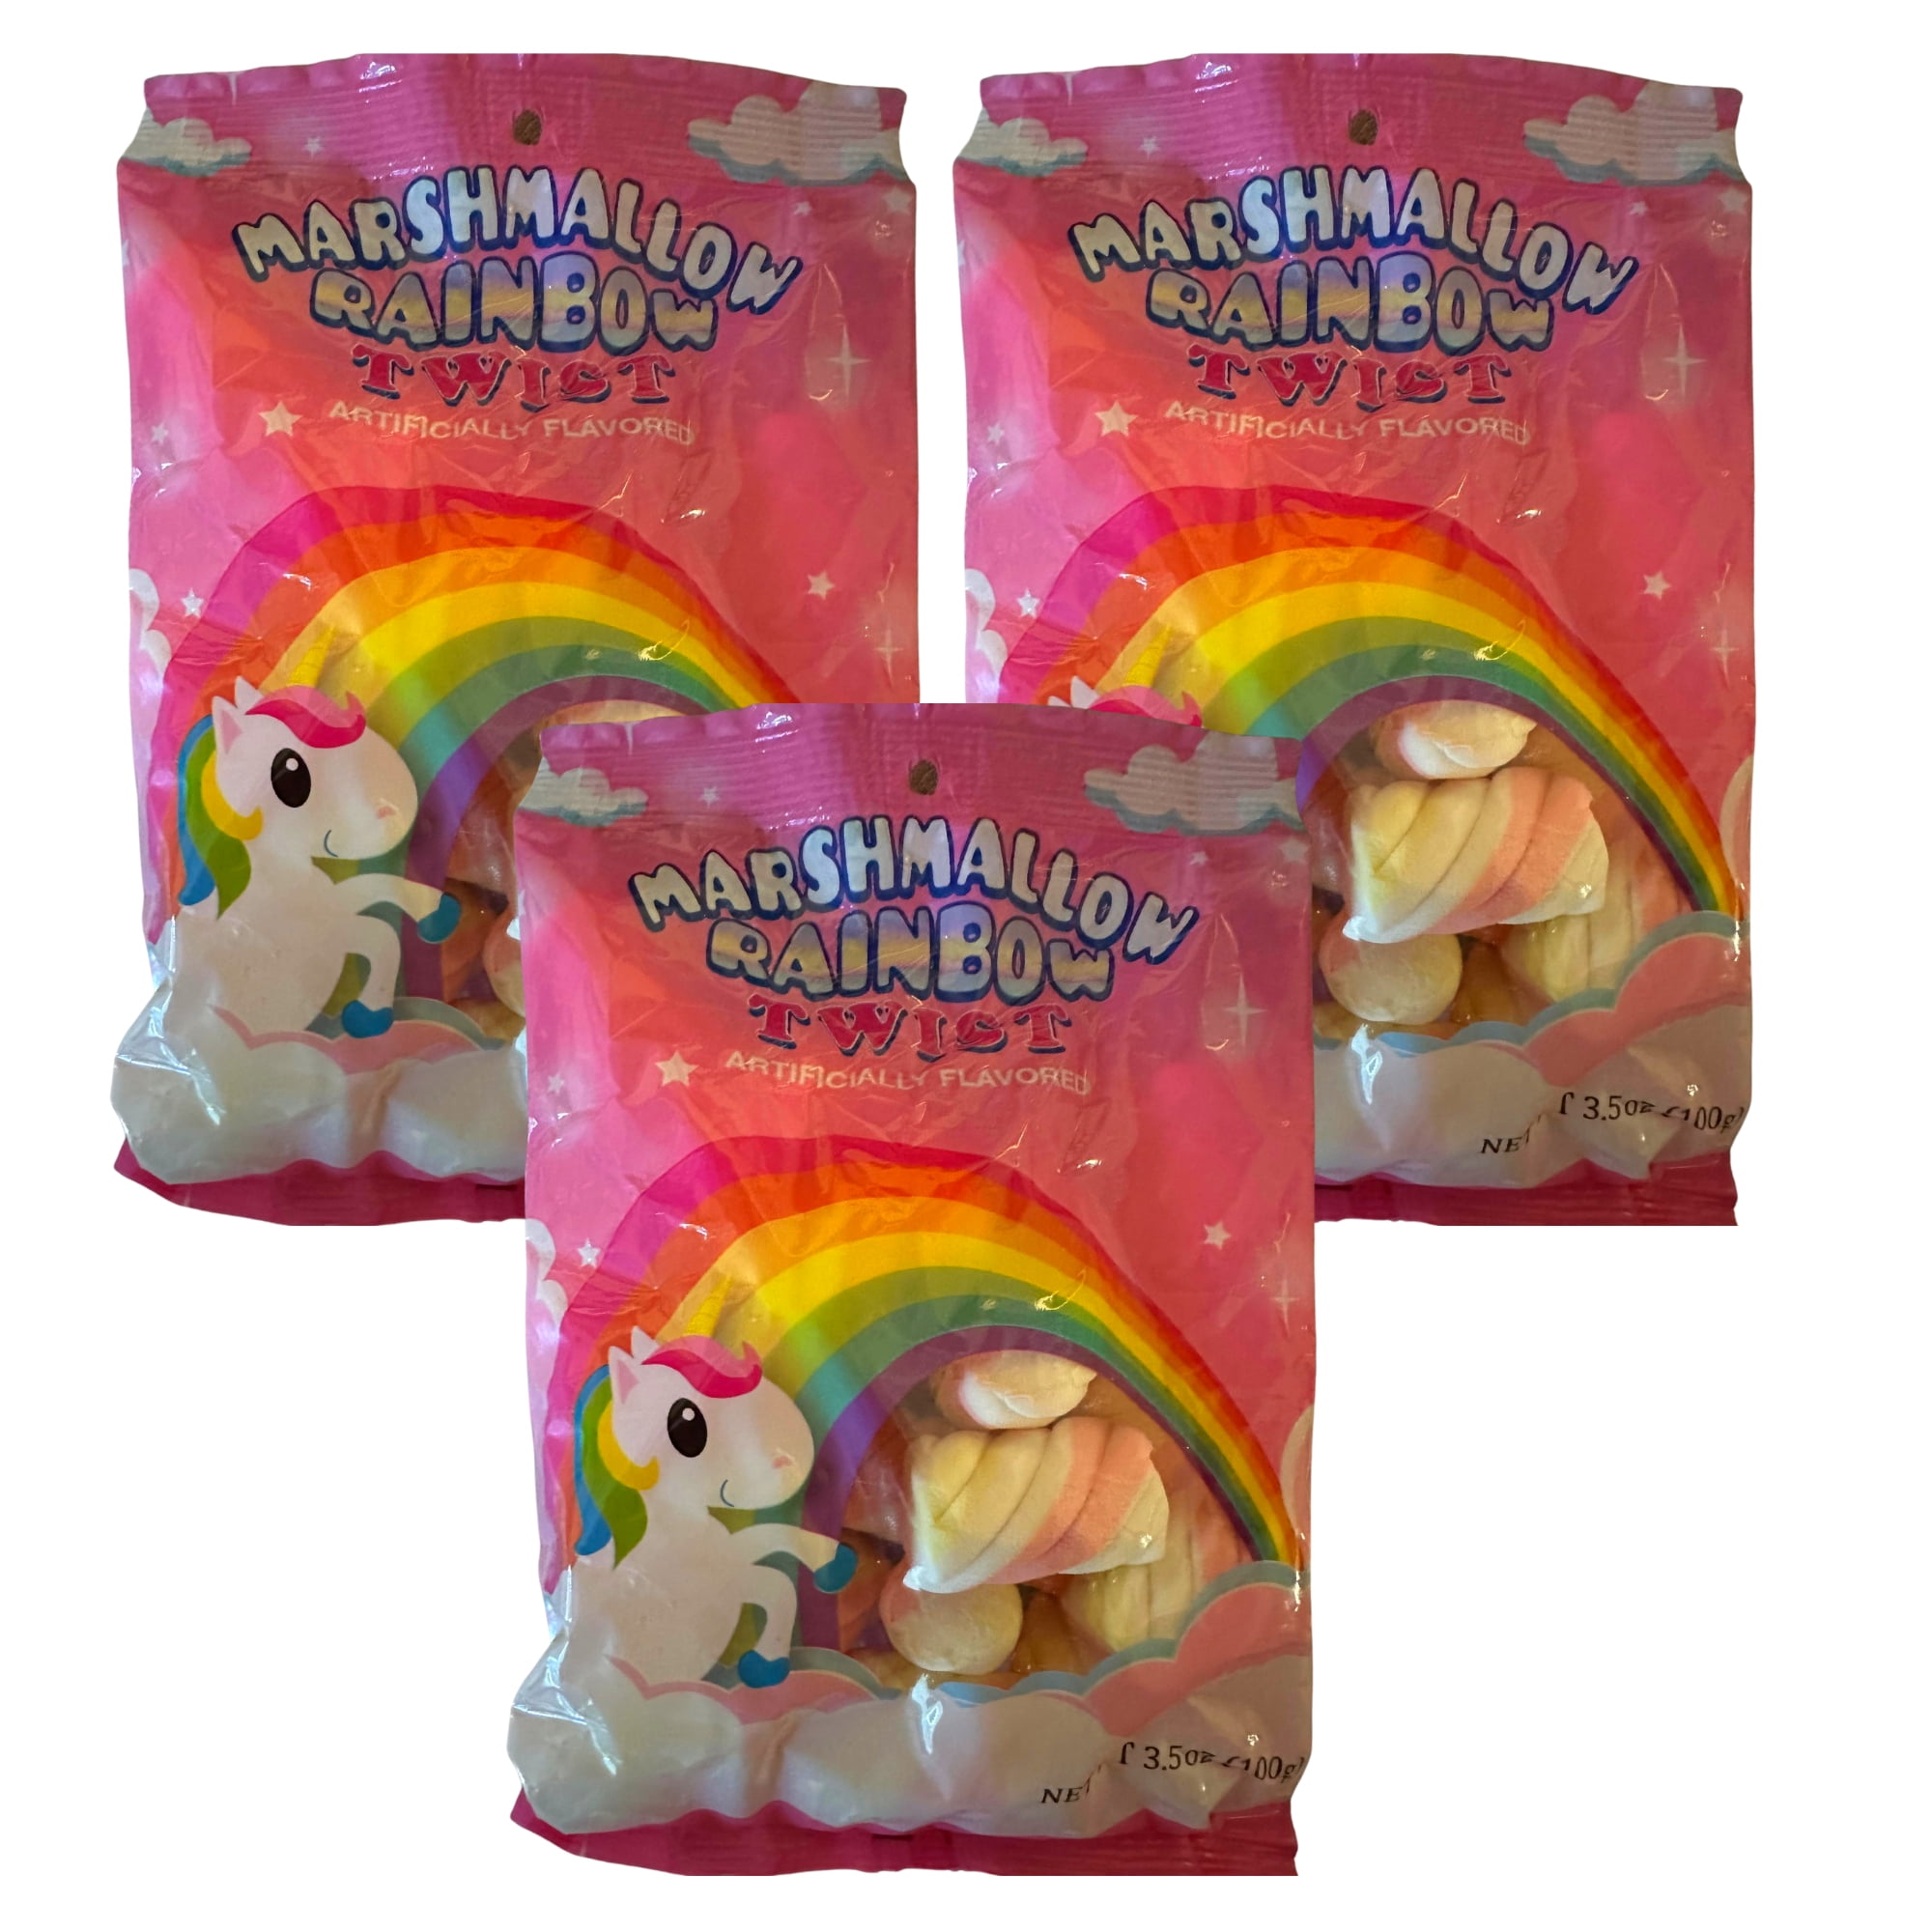 Magical Rainbow Unicorn Dust, Glittery Candy Powder, 8-Pack Unicorn Candy, Fun Party Favor!, Gluten, Dairy, Soy and Nut Free!, Fruit Flavored  Candy